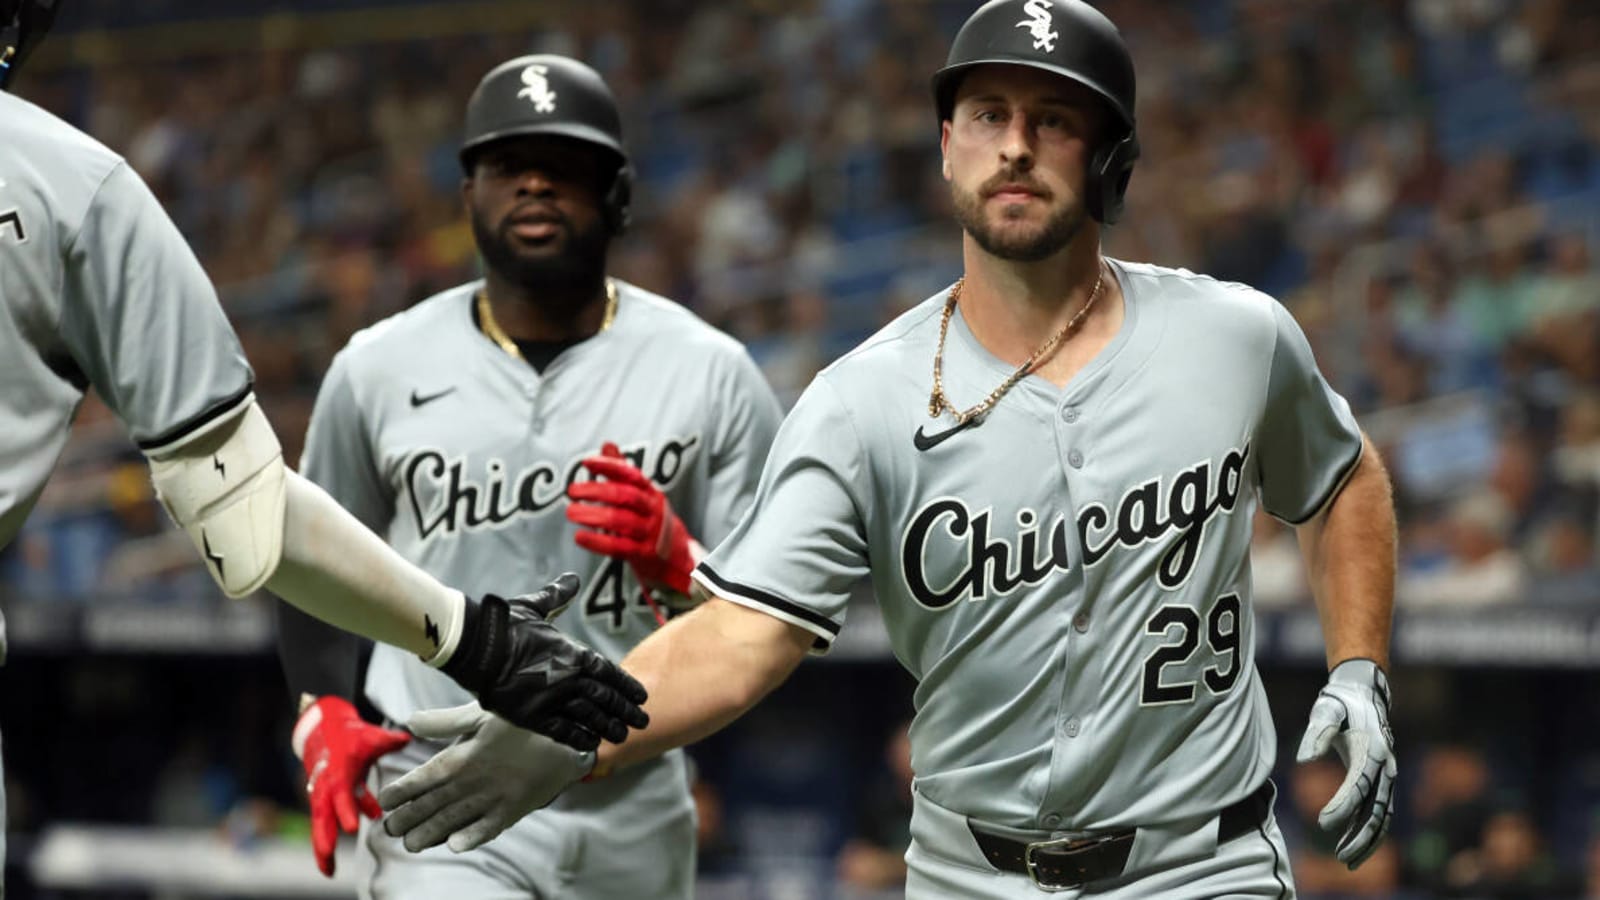 White Sox Beat Rays with Strong Pitching and Opportunistic Hitting